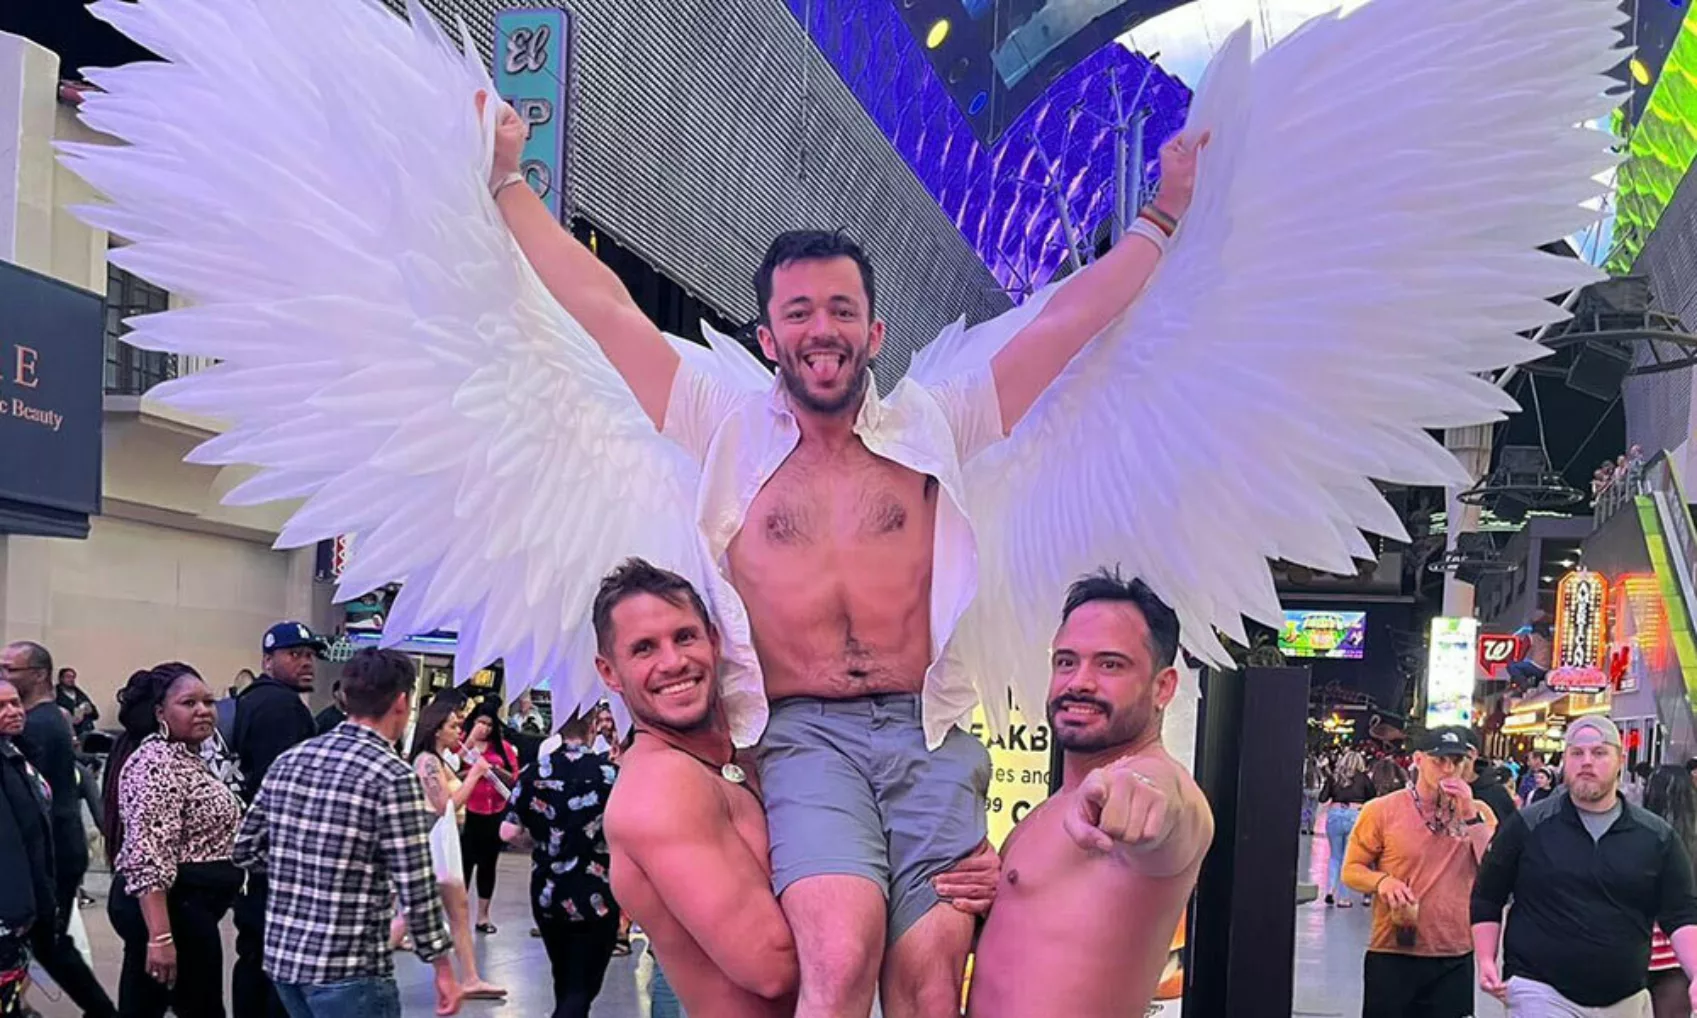 Ryan Duce lifted in the air by two shirtless men. His arms are raised displaying angel wing decorations.